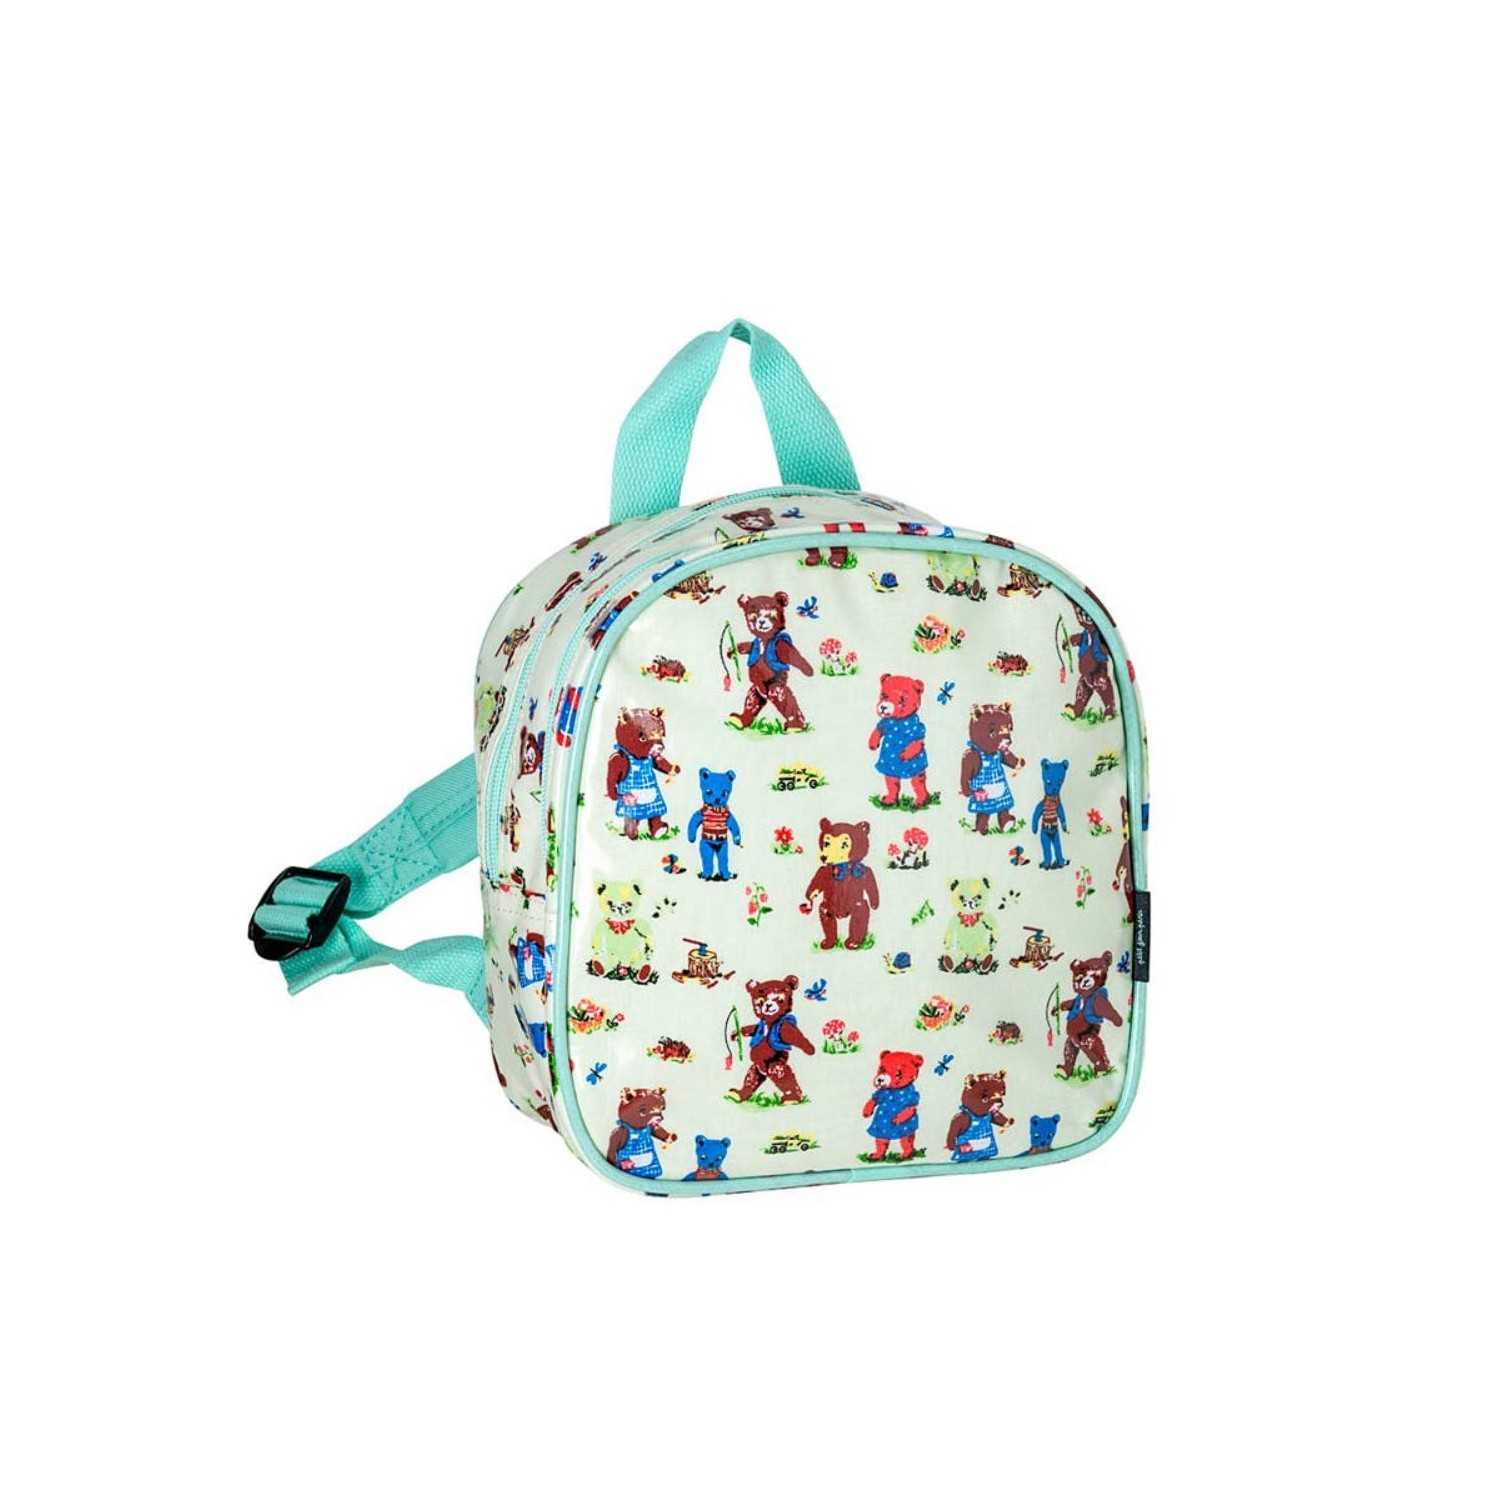 Kids small backpack